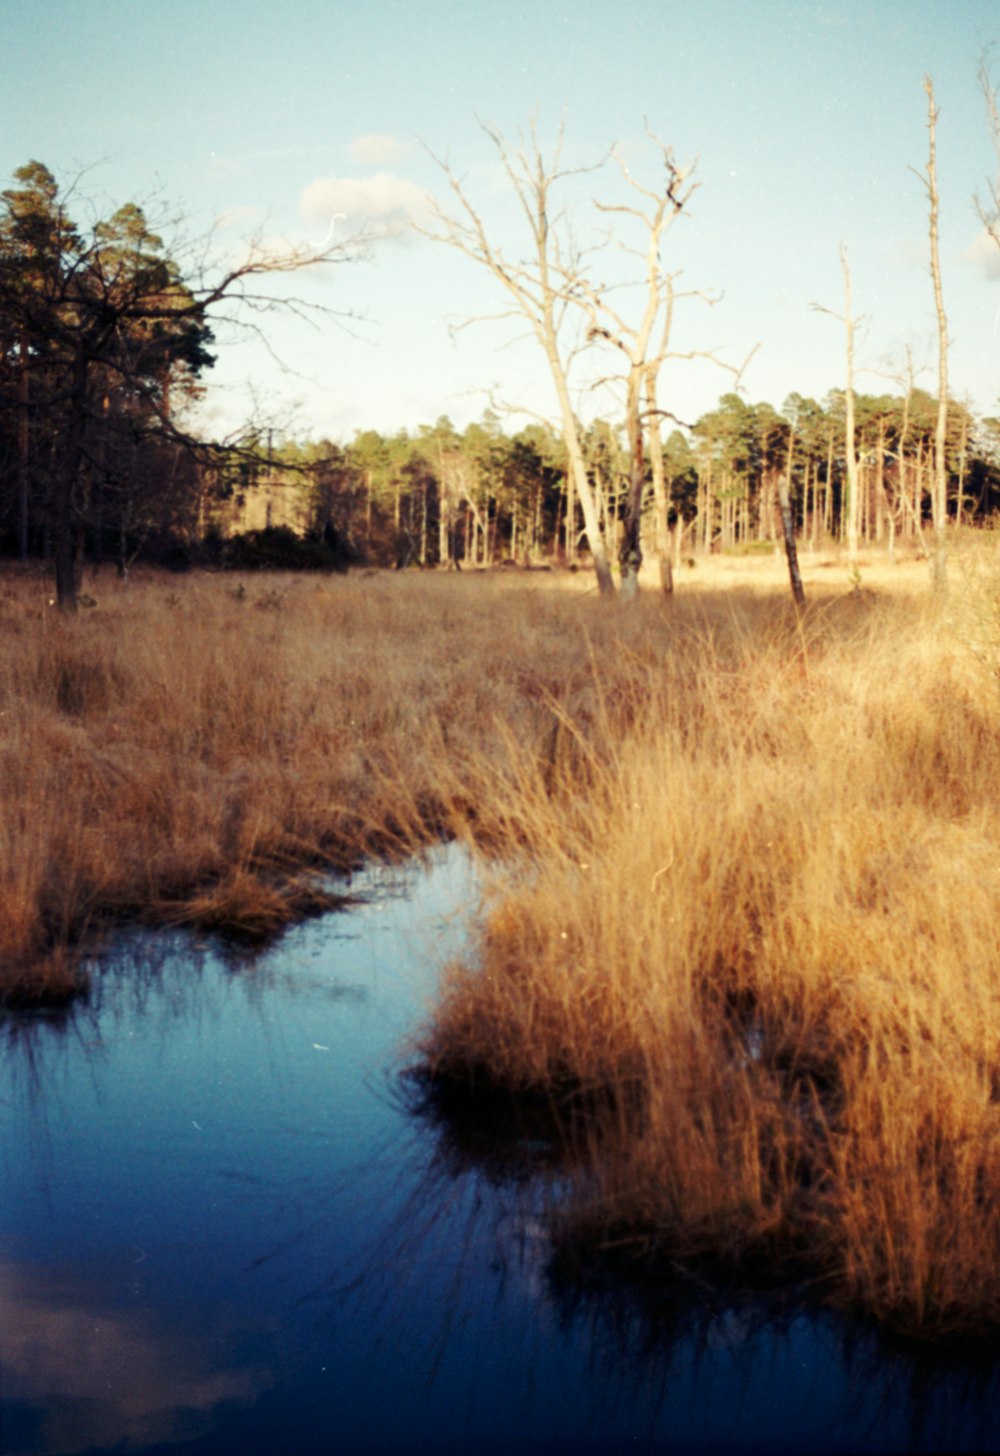 a small stream running through a dry grass covered field